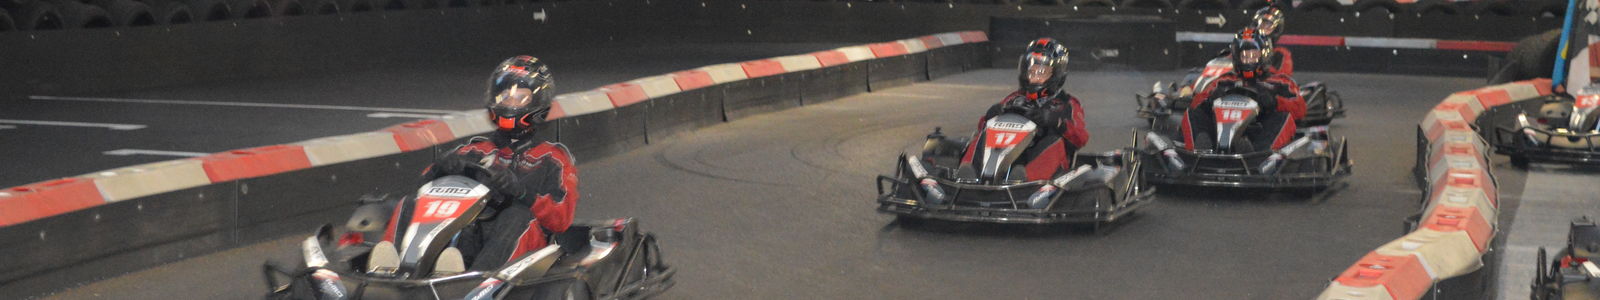 Inverness Office Karting